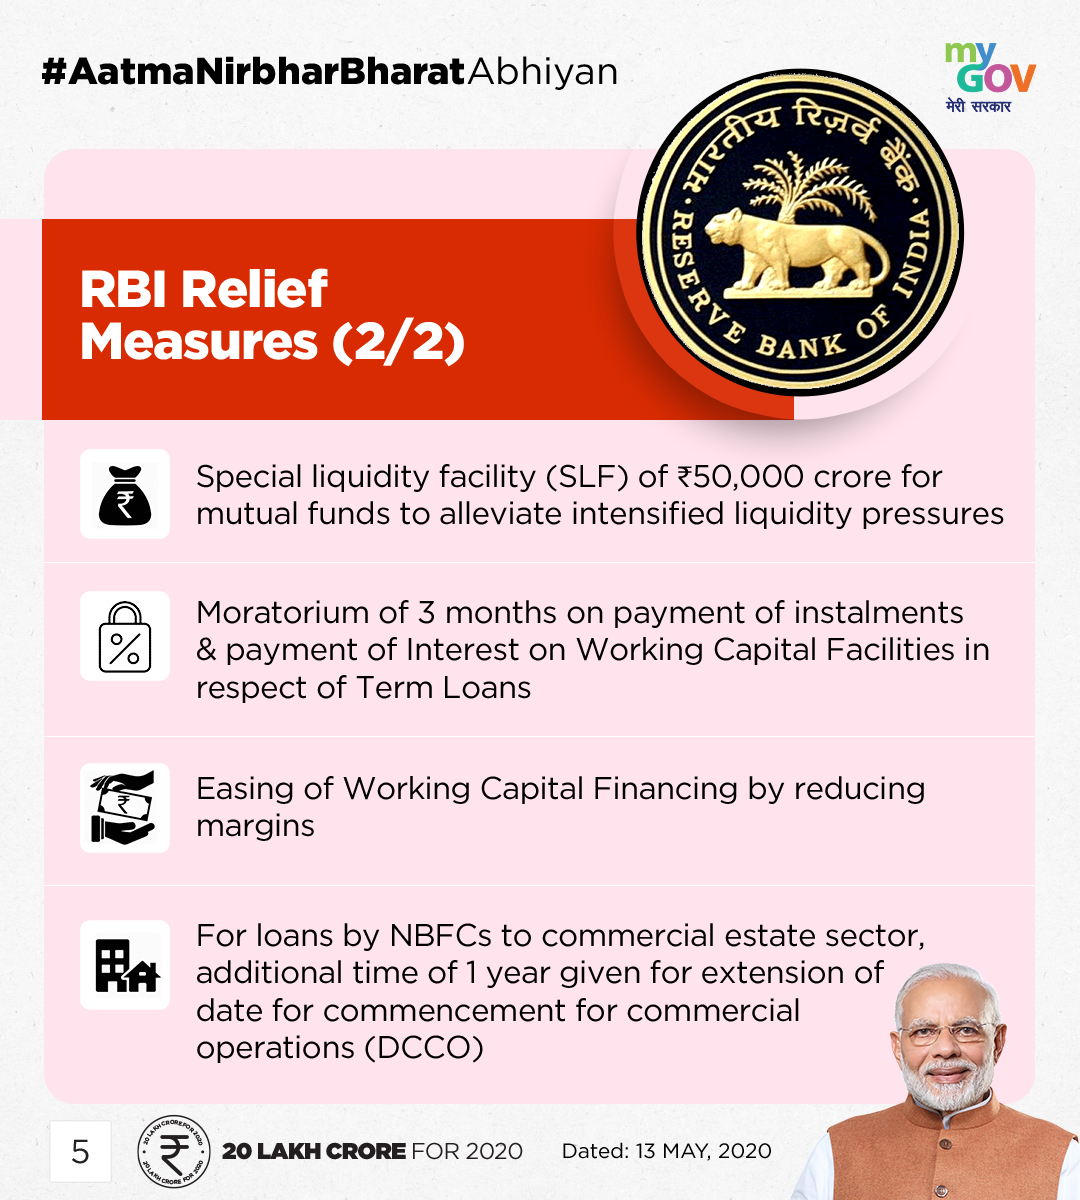 RBI Relief Measures